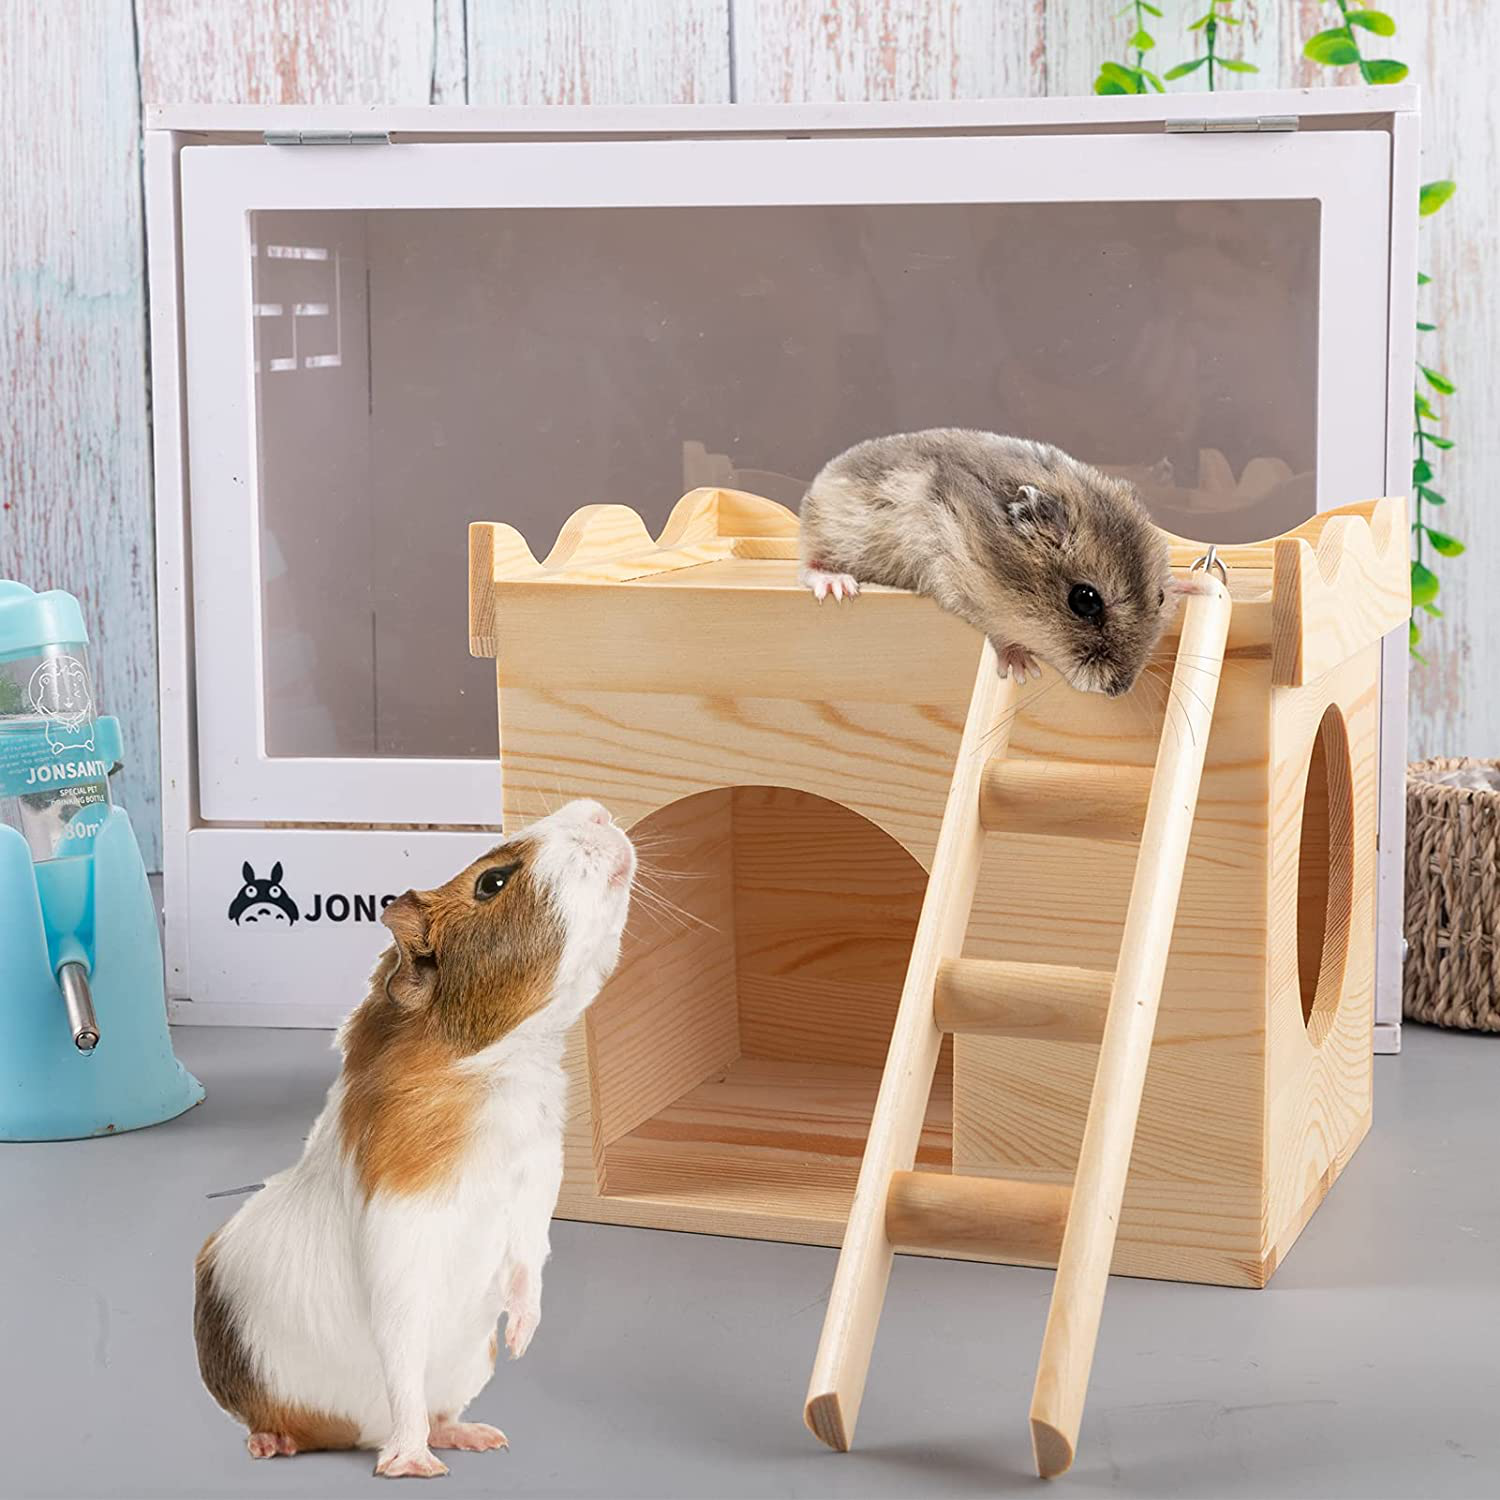 MEWTOGO Wave Style Guinea Pigs Castle Wood House- Guinea Pig Hideout Chinchilla Hideout with Wooden Stairs for Guinea Pigs Hamsters Squirrel